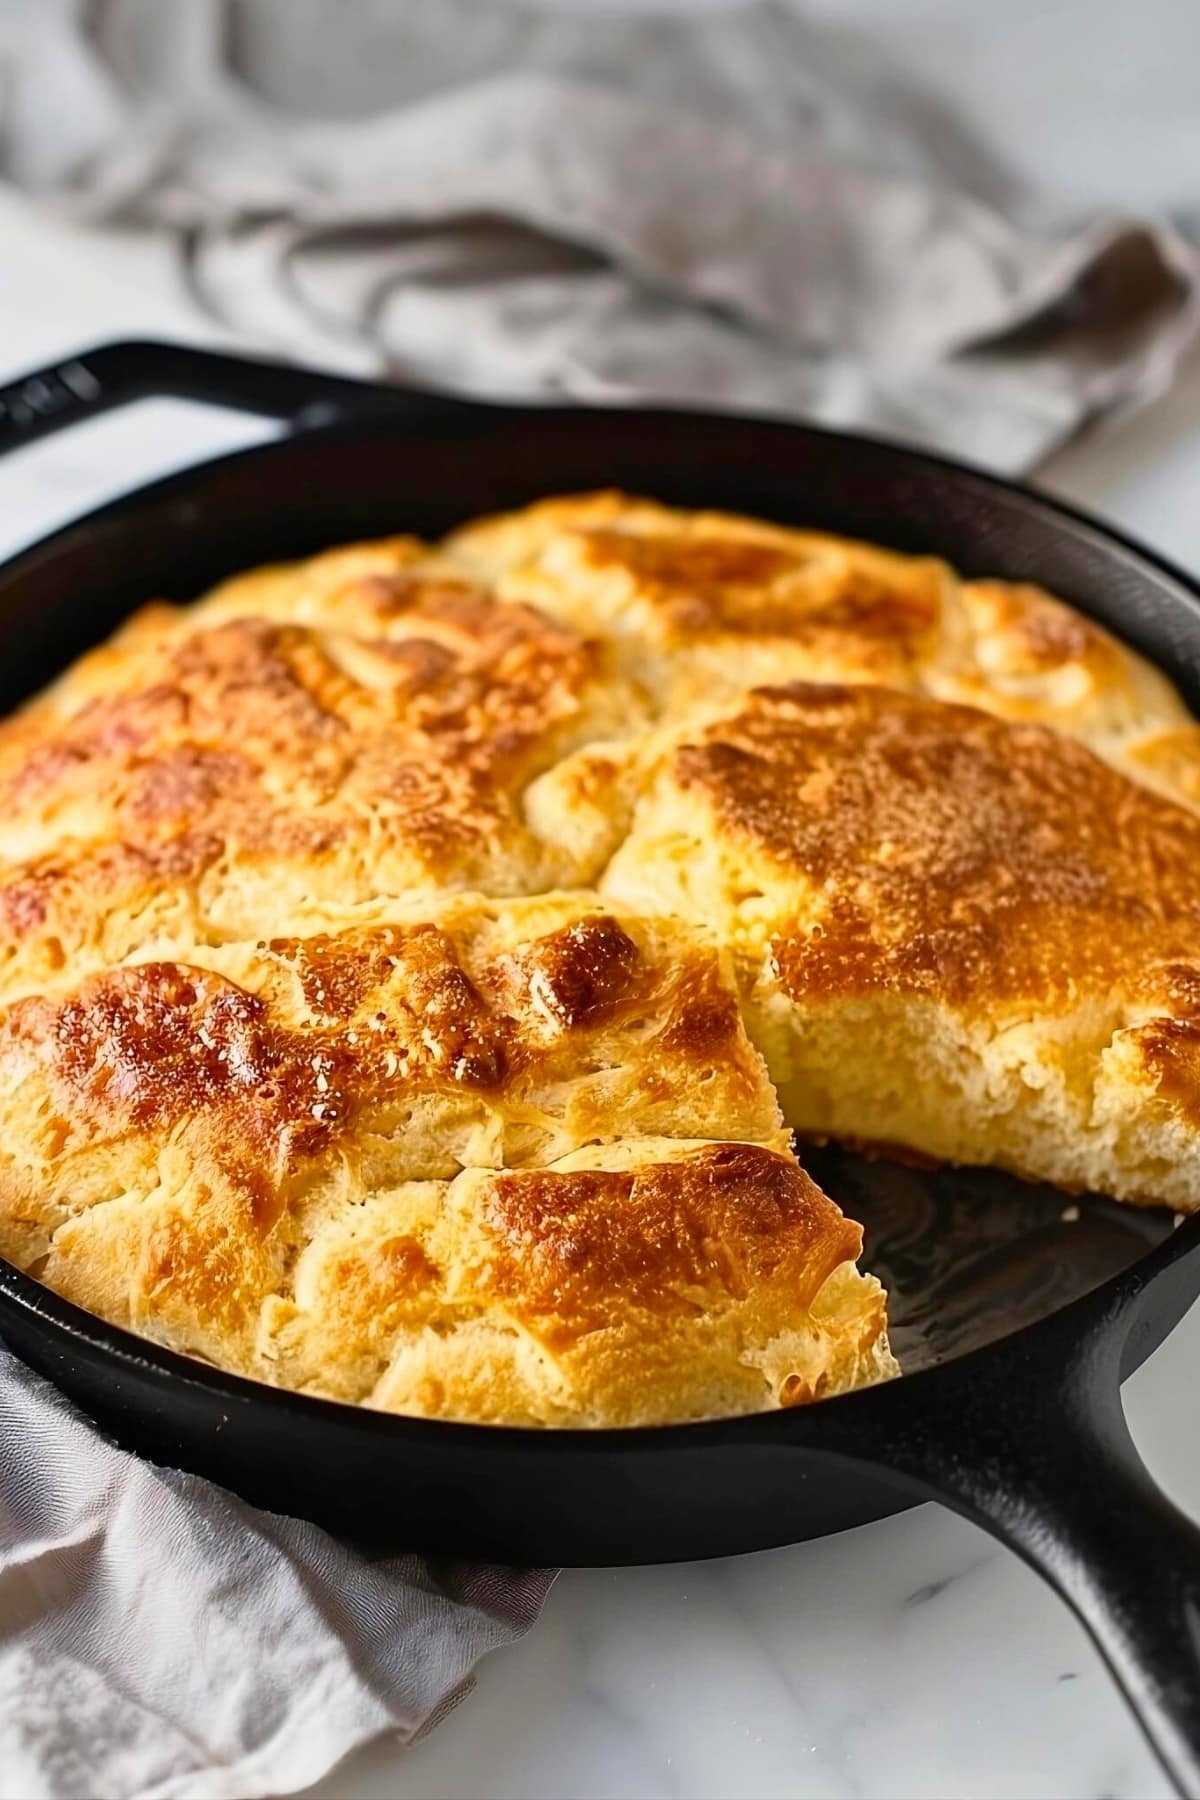 Biscuit bread cooked in an cast iron skillet.